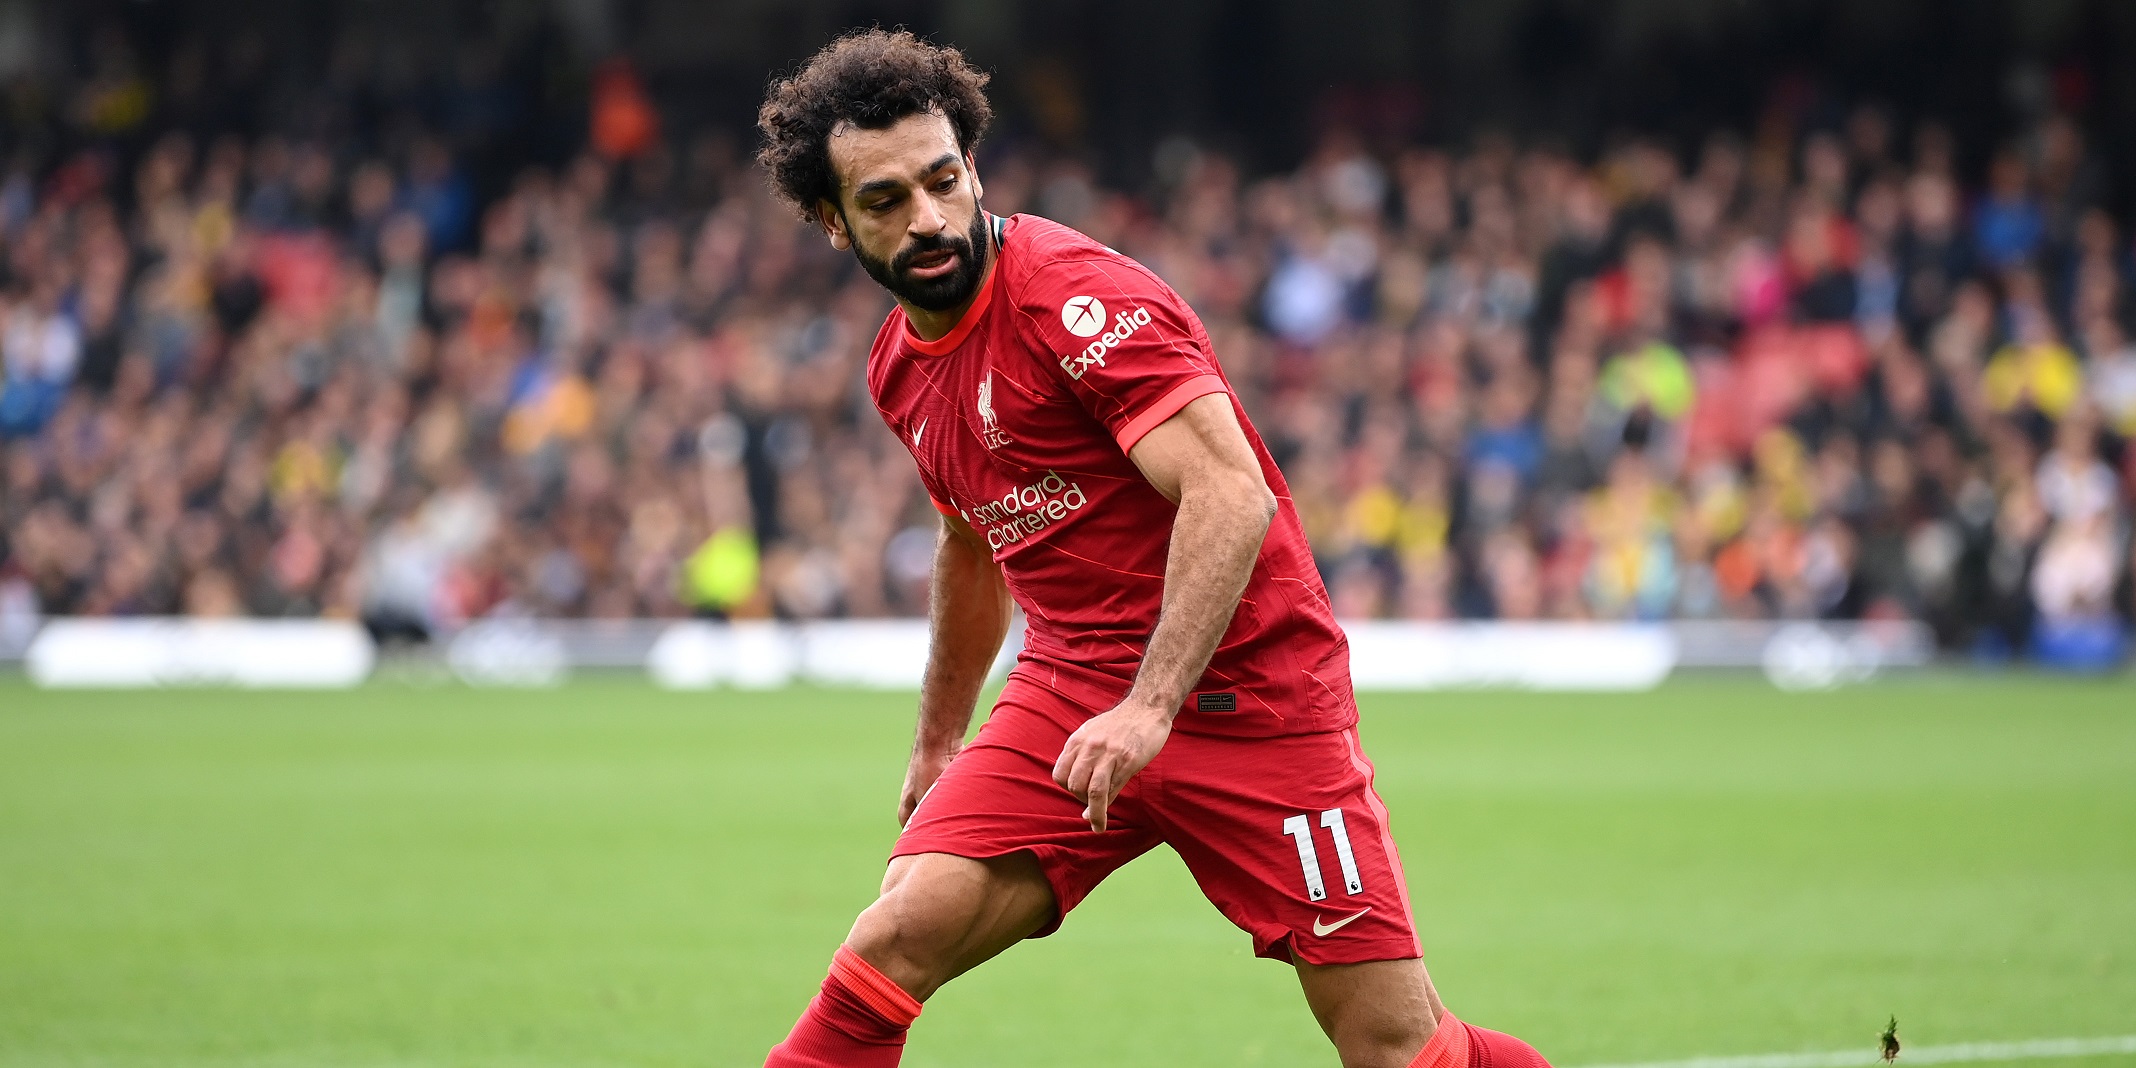 ‘He’s setting the bar very high at the moment’ – Mason Mount full of praise for Mo Salah as Liverpool prepare for trip to Stamford Bridge